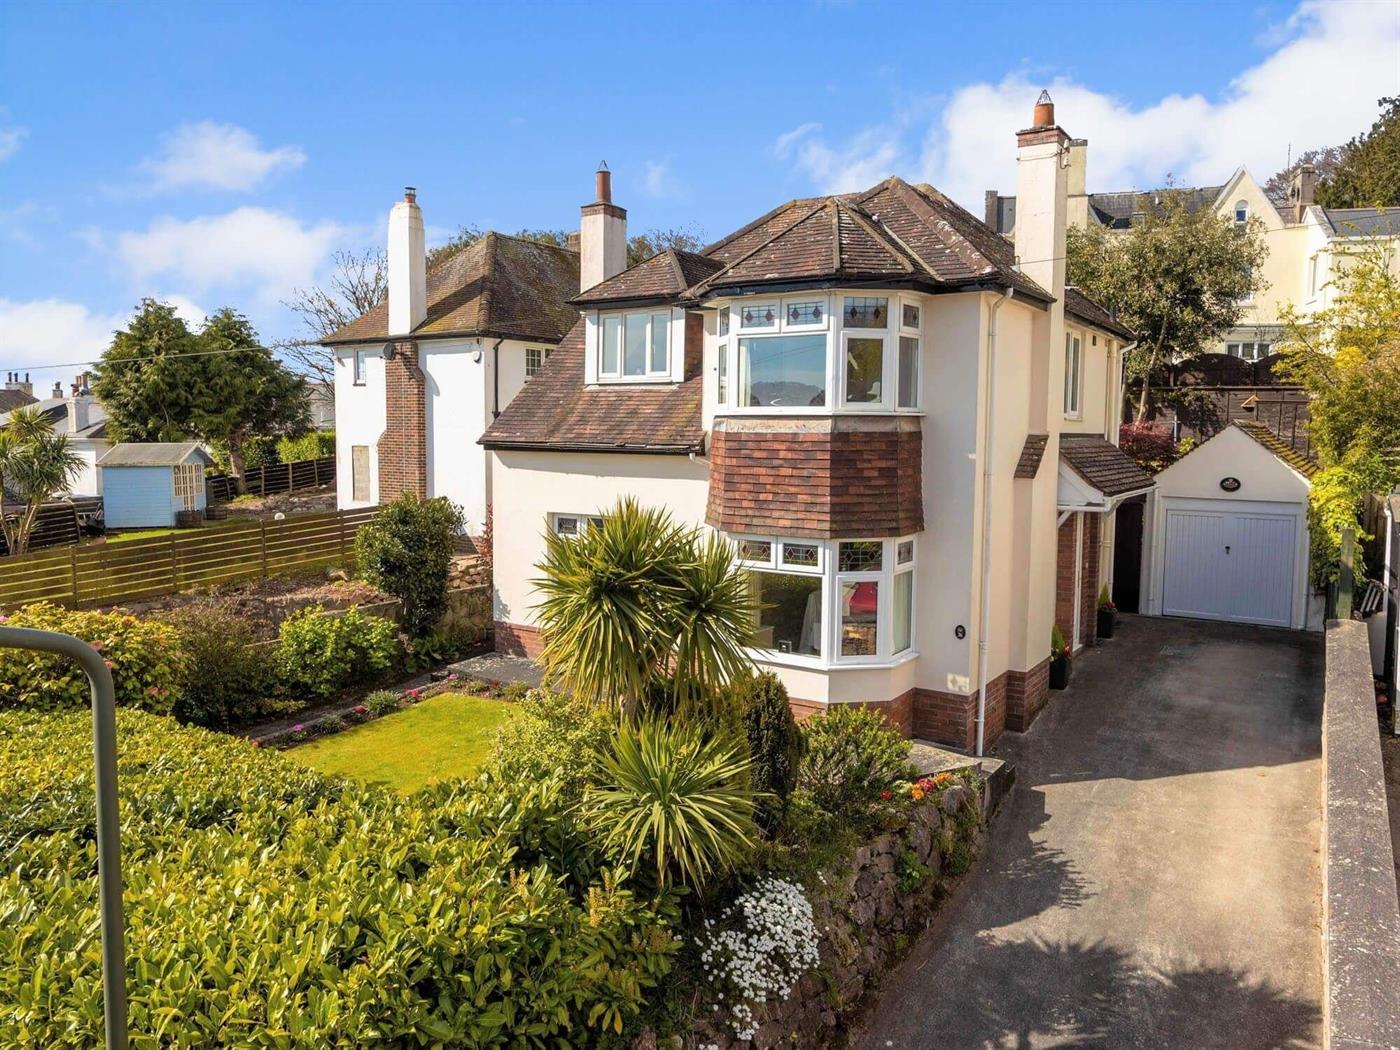 3 Bedroom Detached House for Sale (Sold): Old Teignmouth Road, Torquay, TQ1 4EQ